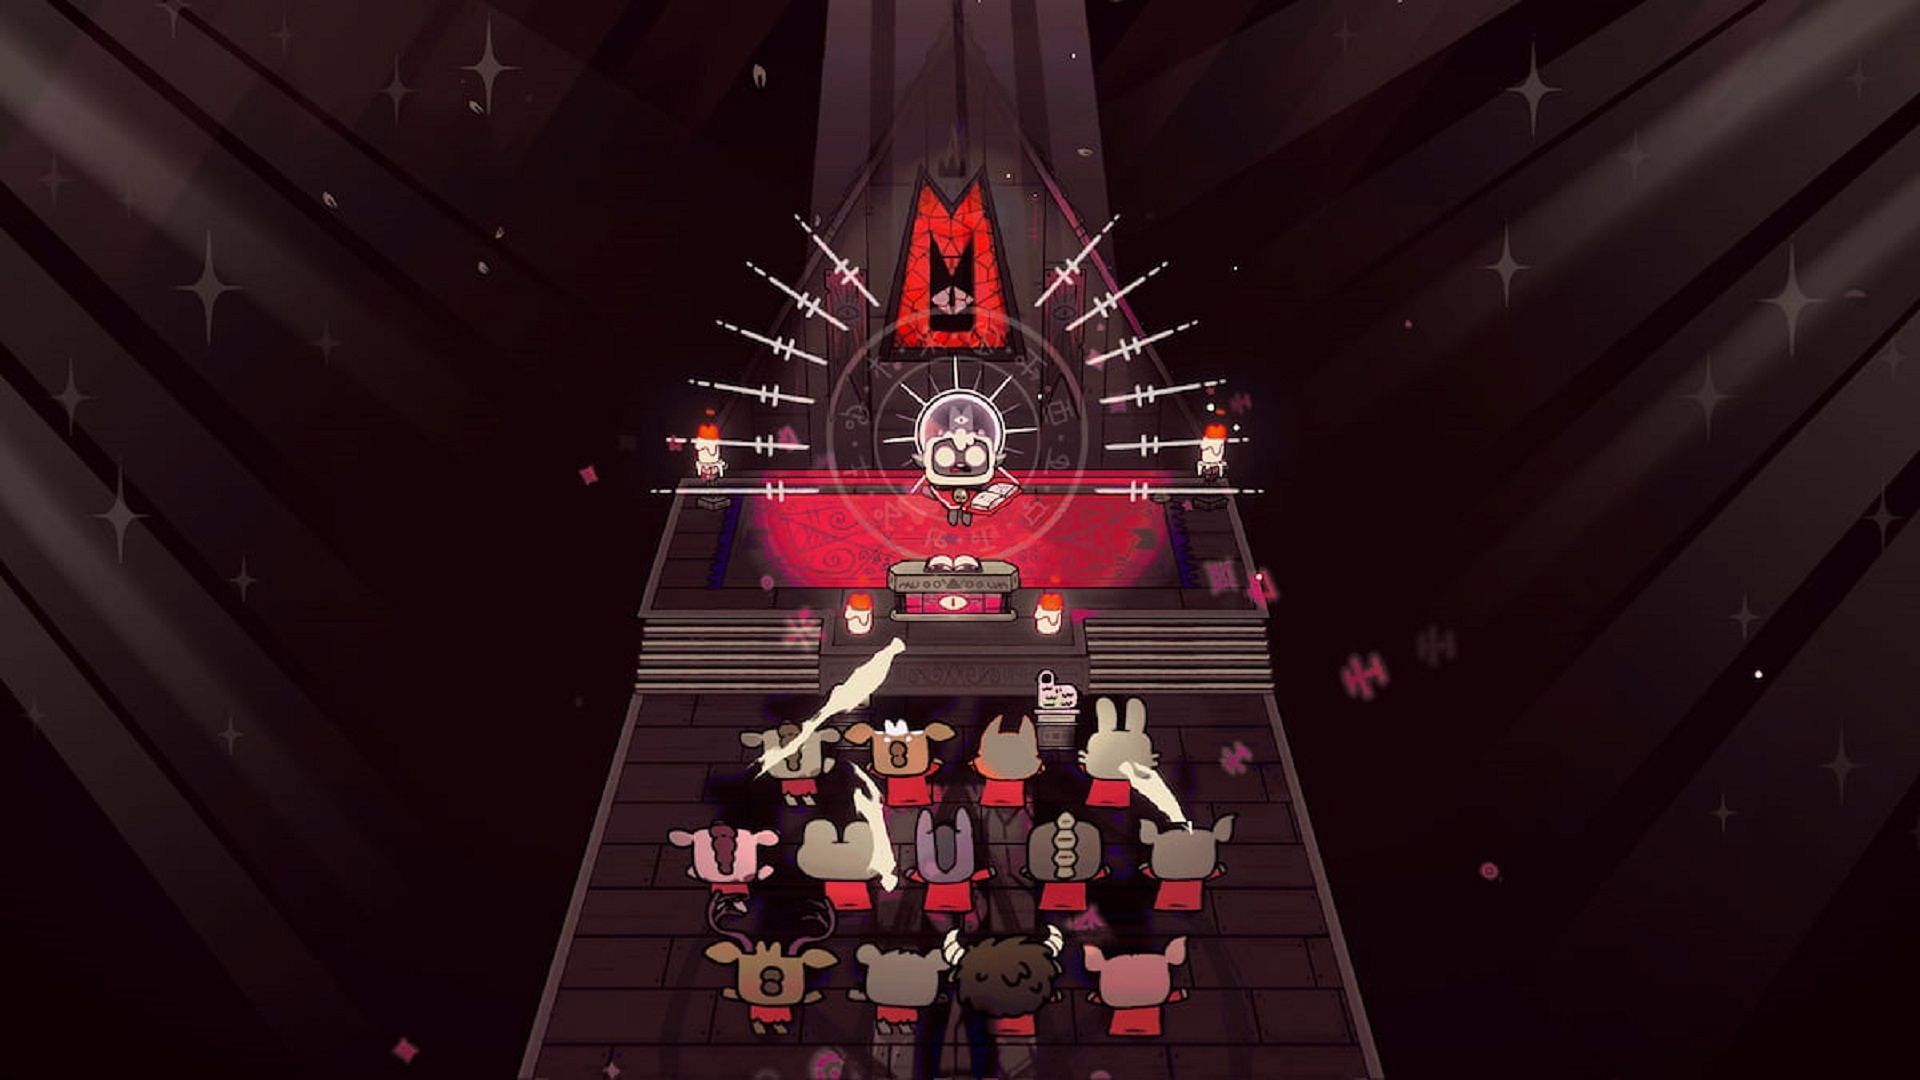 Cult of the Lamb lets you command and care for your devoted followers